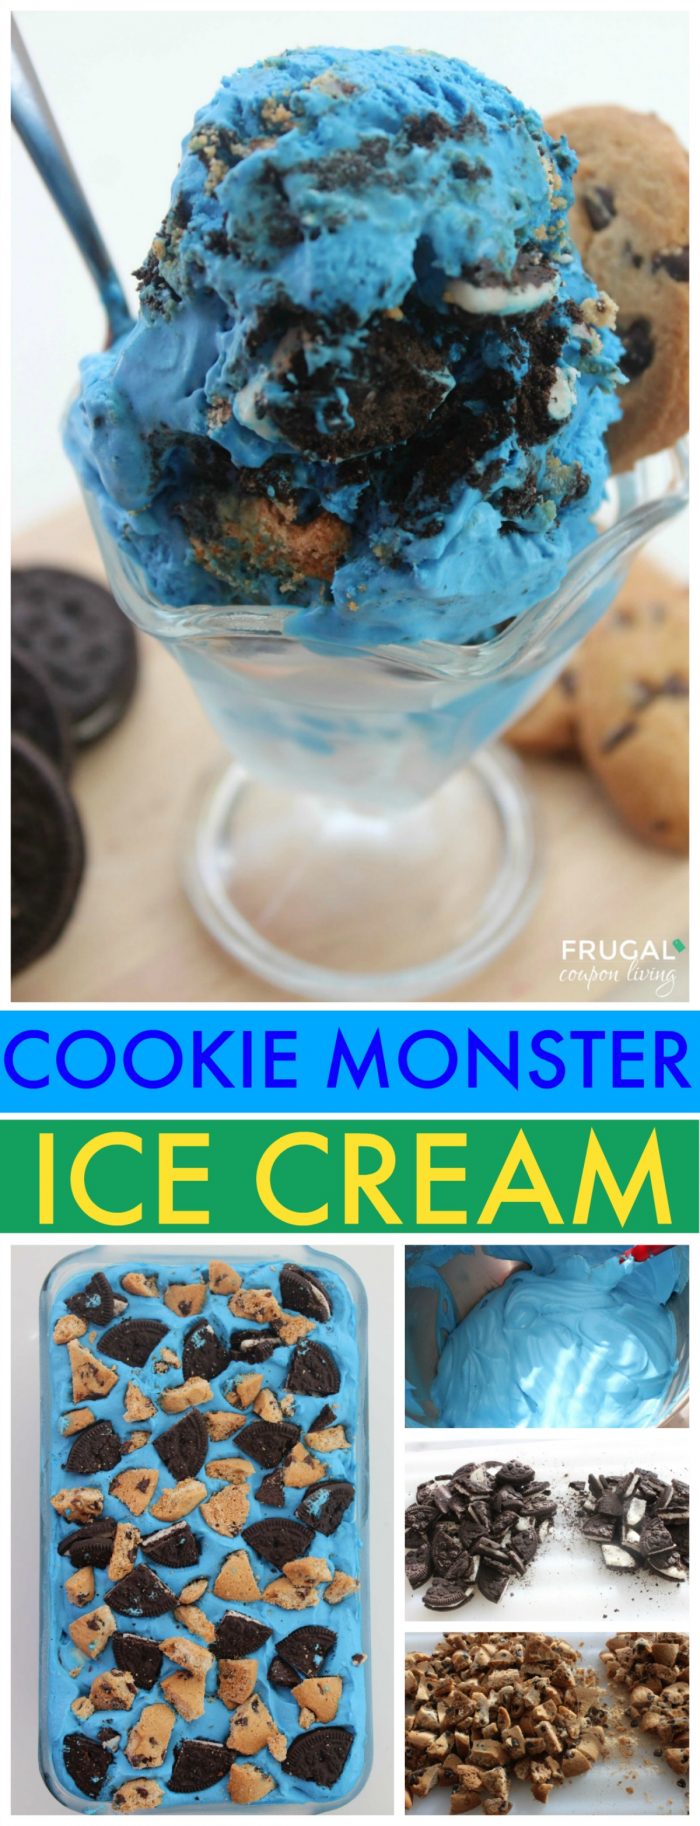 cookie-monster-ice-cream-frugal-coupon-living-Collage